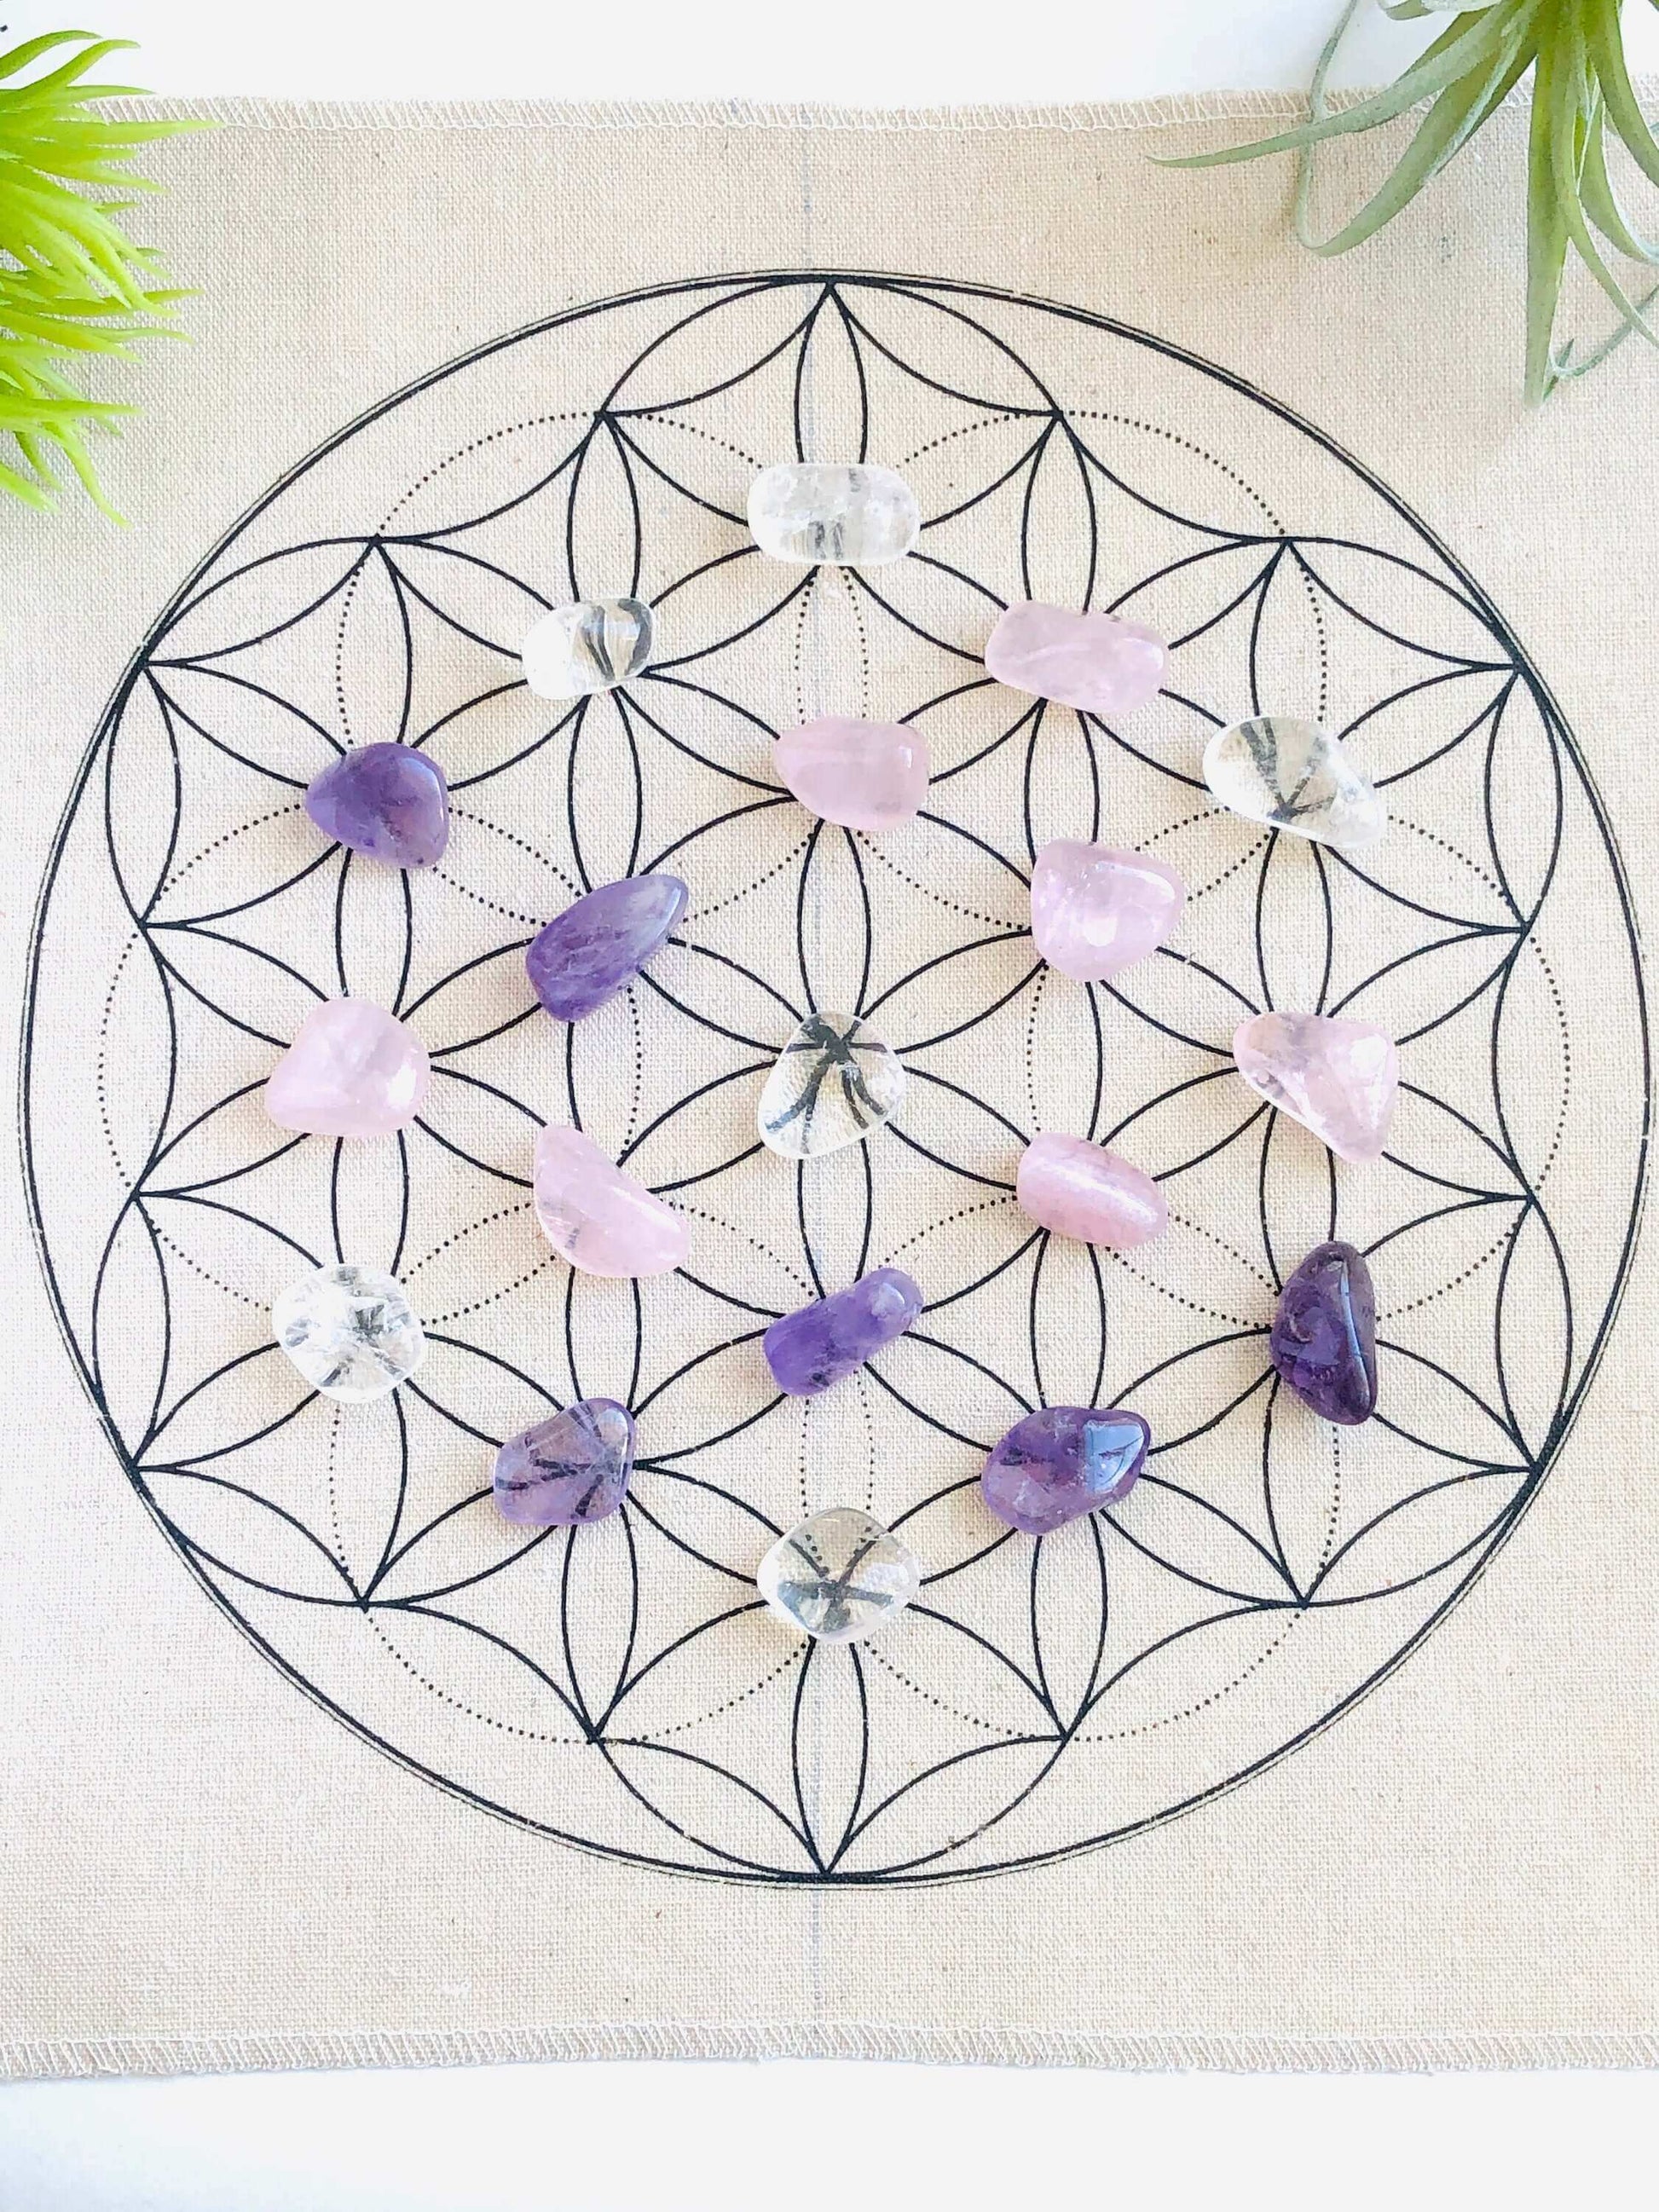 Crystal Grid Kit With Crystals - Flower Of Life